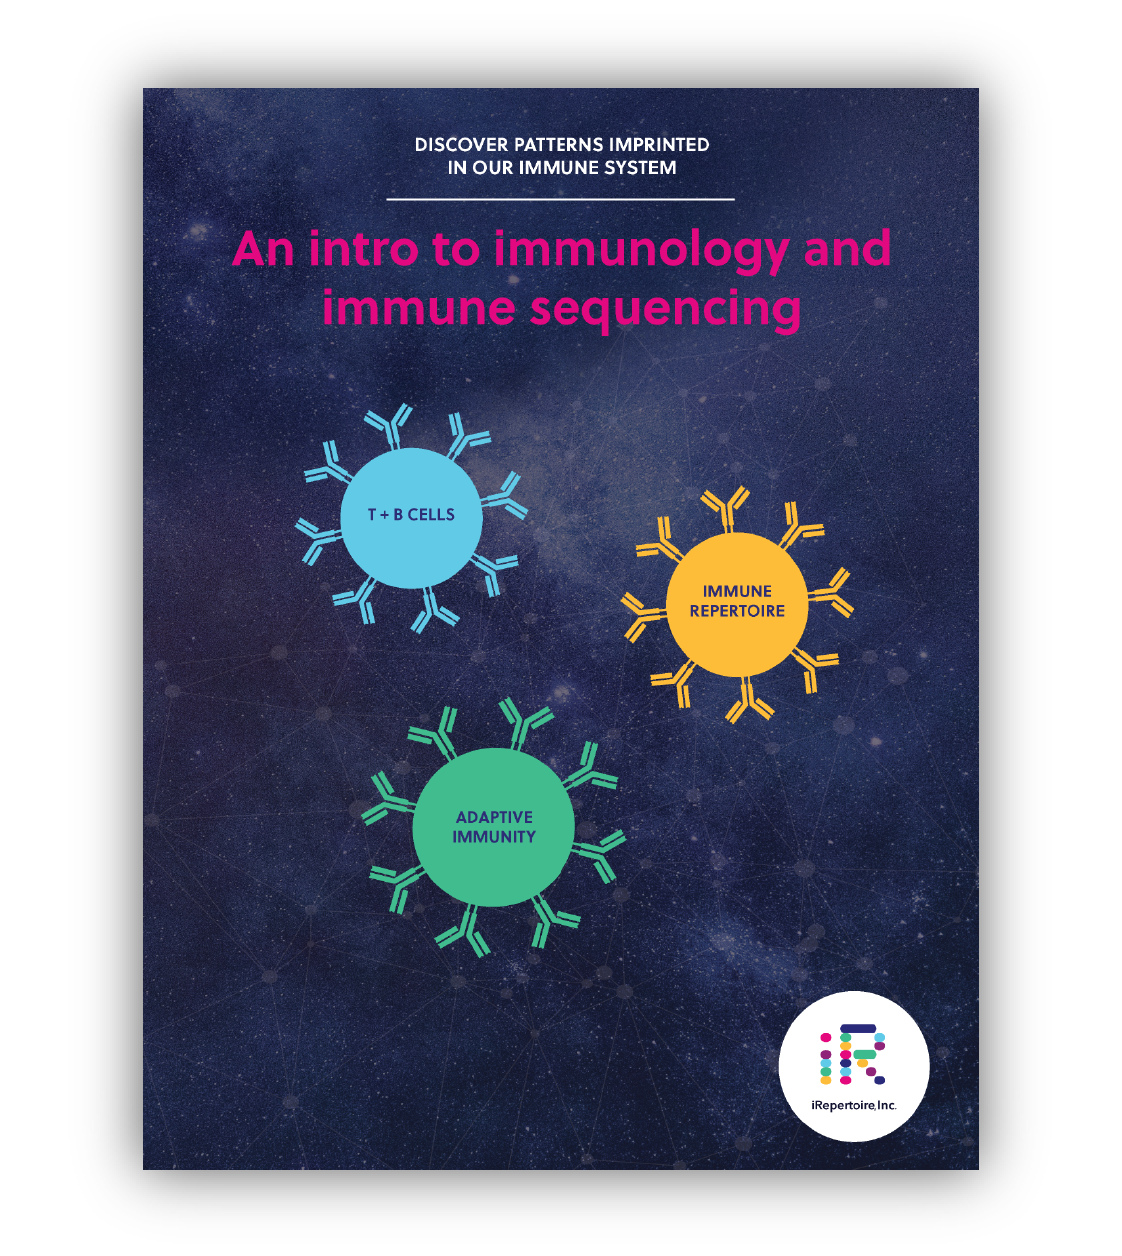 iRepertoire eBook 1: An Intro to Immunology and Immune Sequencing cover thumbnailiRepertoire eBook 1: An Intro to Immunology and Immune Sequencing. Fill out the form to download.